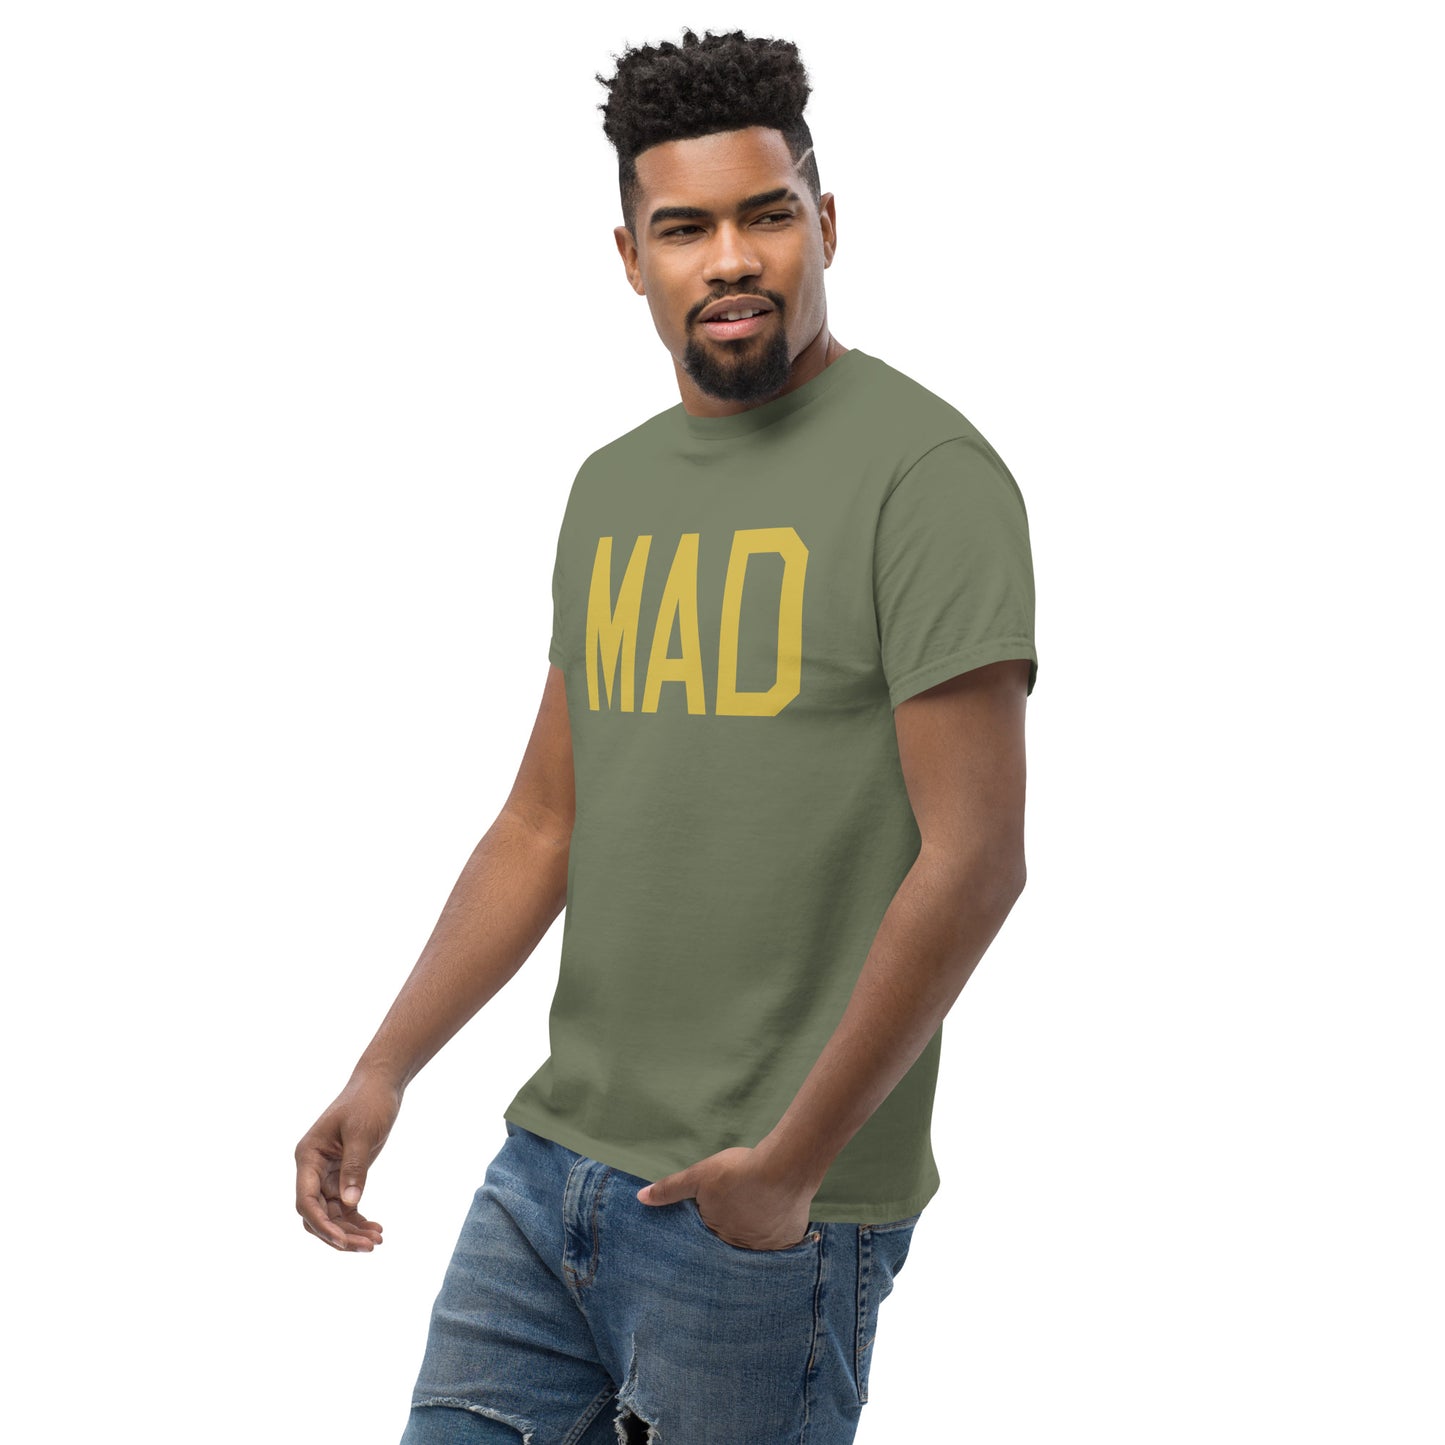 Aviation Enthusiast Men's Tee - Old Gold Graphic • MAD Madrid • YHM Designs - Image 07